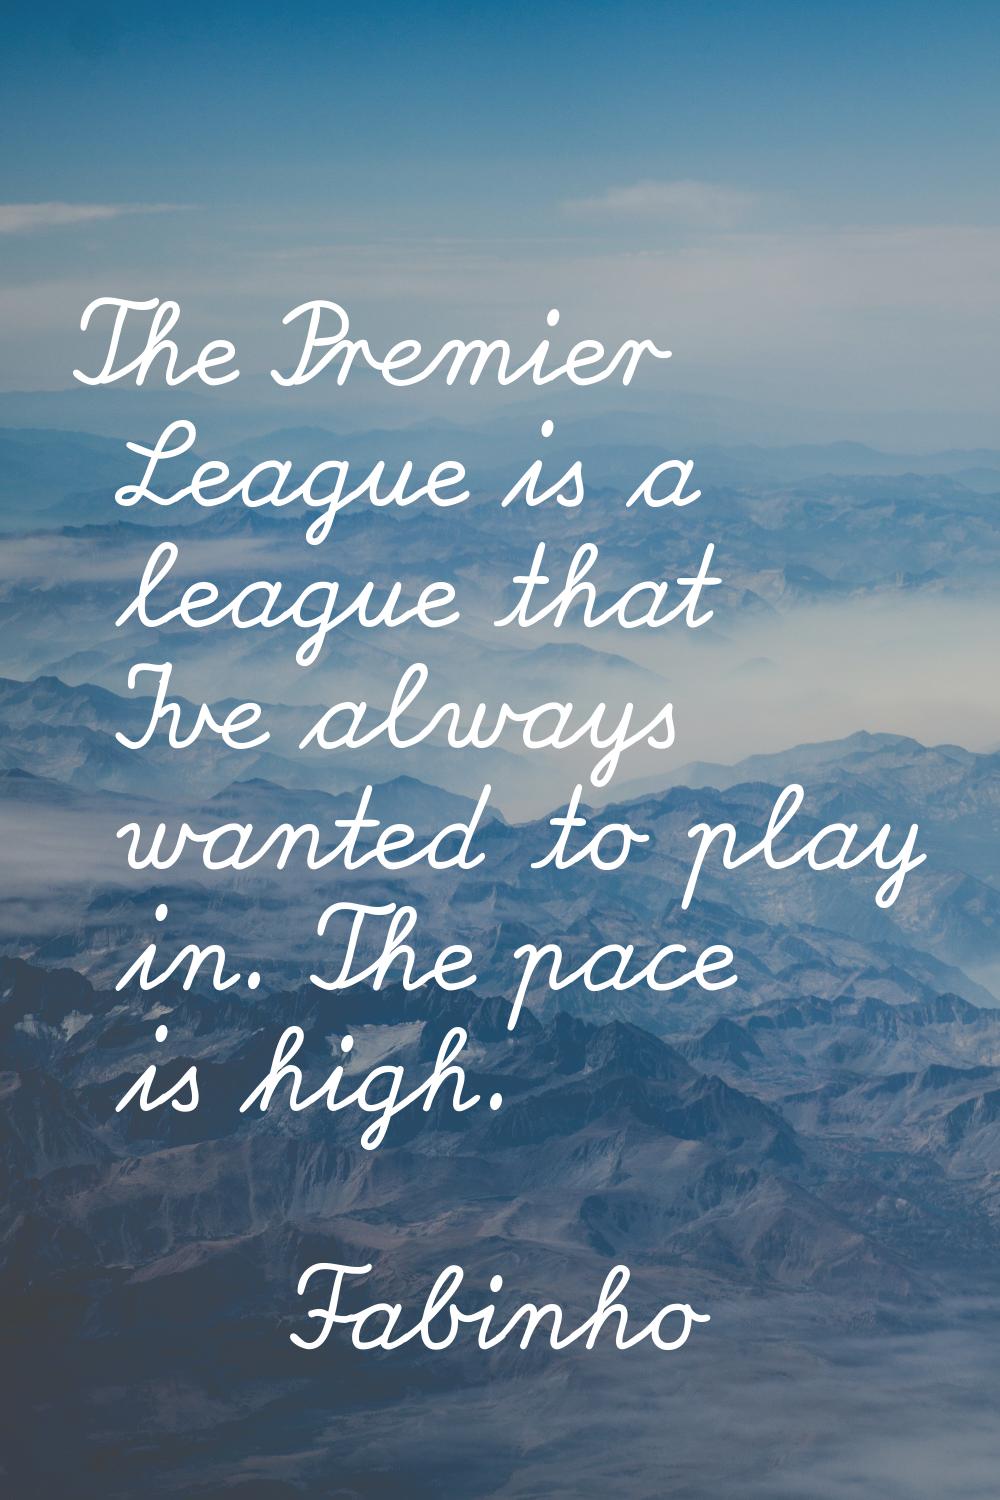 The Premier League is a league that I've always wanted to play in. The pace is high.